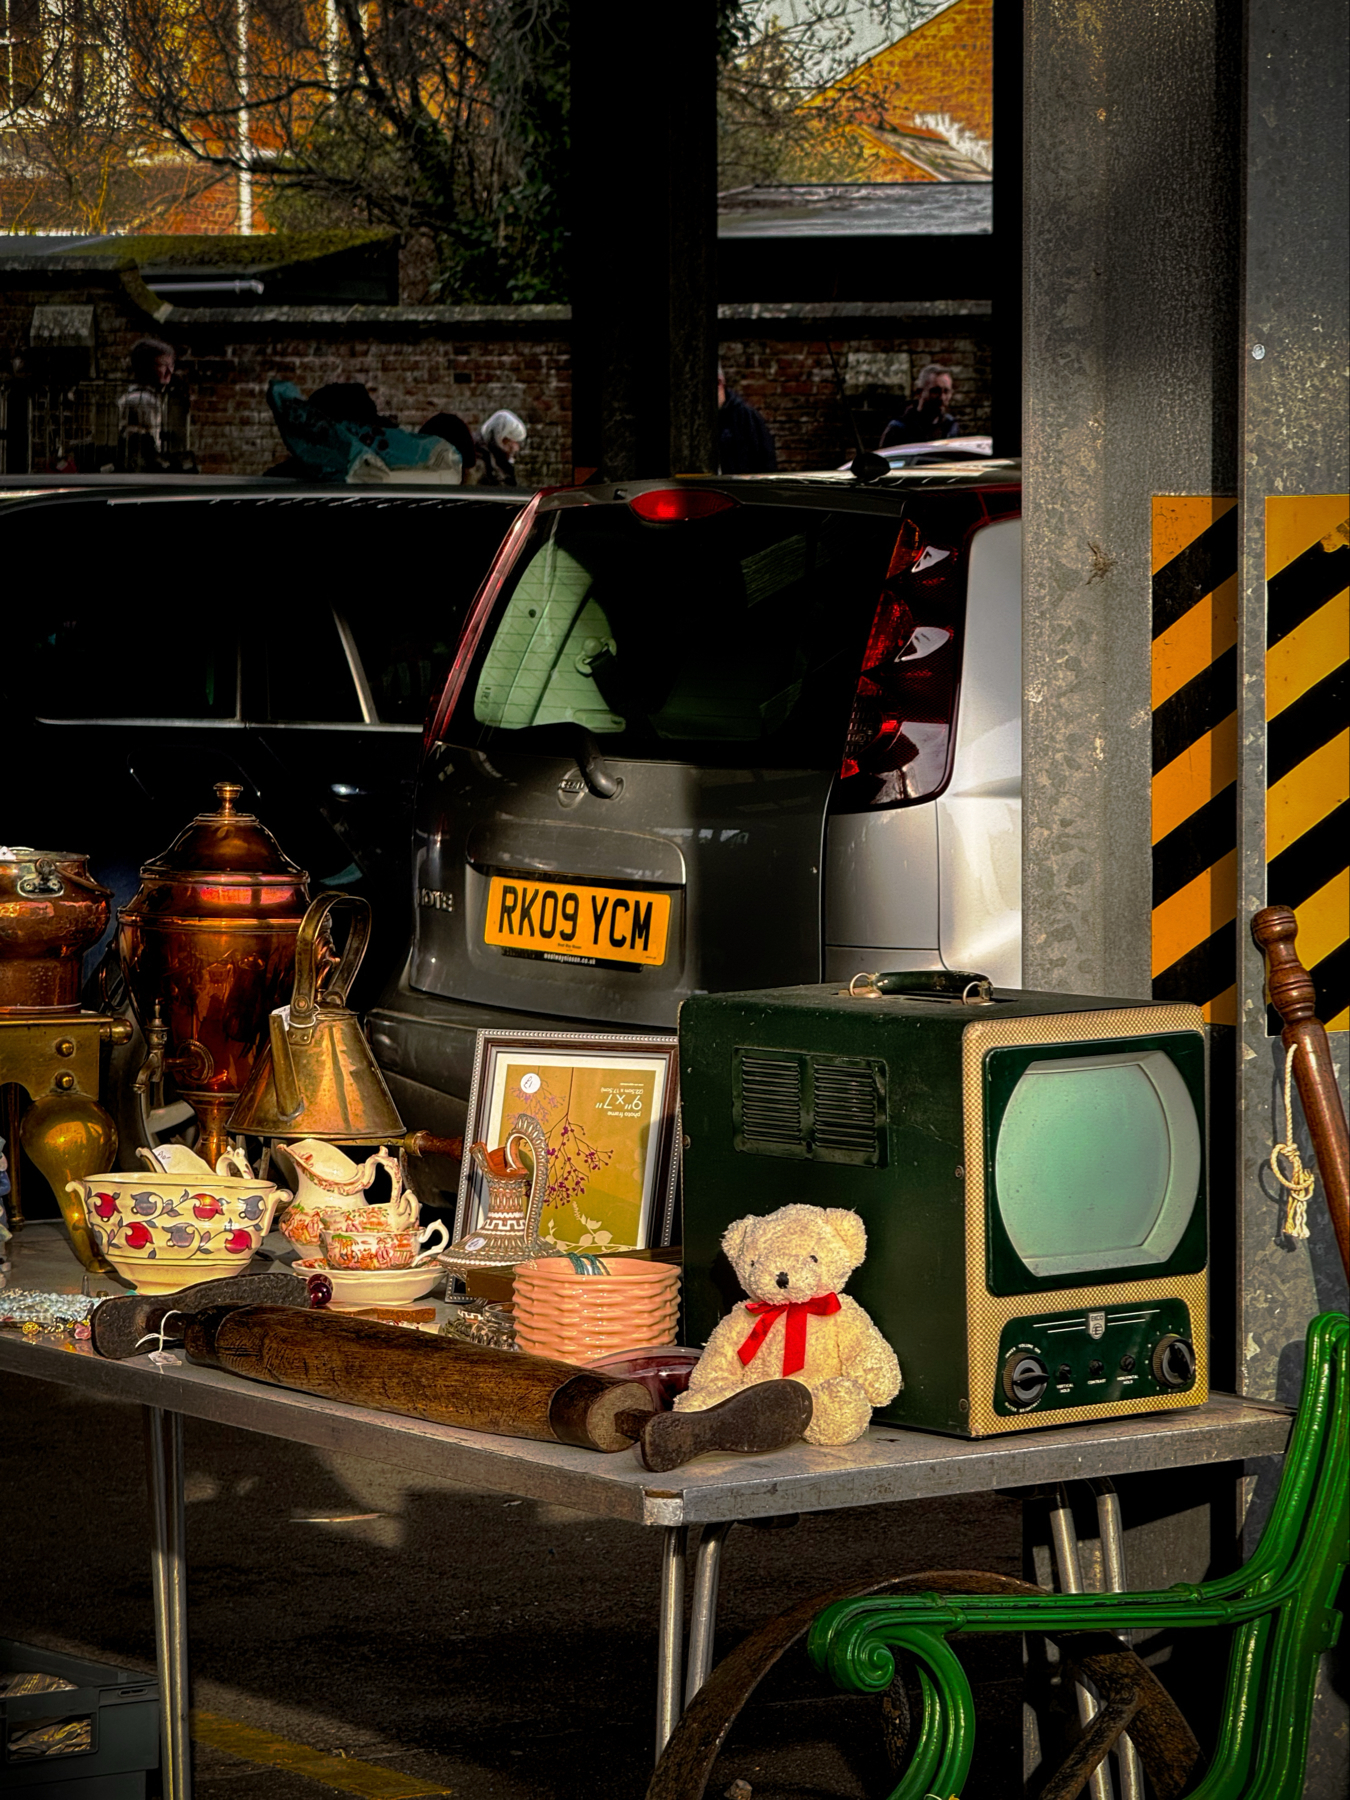 A variety of vintage items displayed on a table at a flea market, including a teddy bear, an old television, assorted pottery, and metal teapots, with parked cars and people in the background.